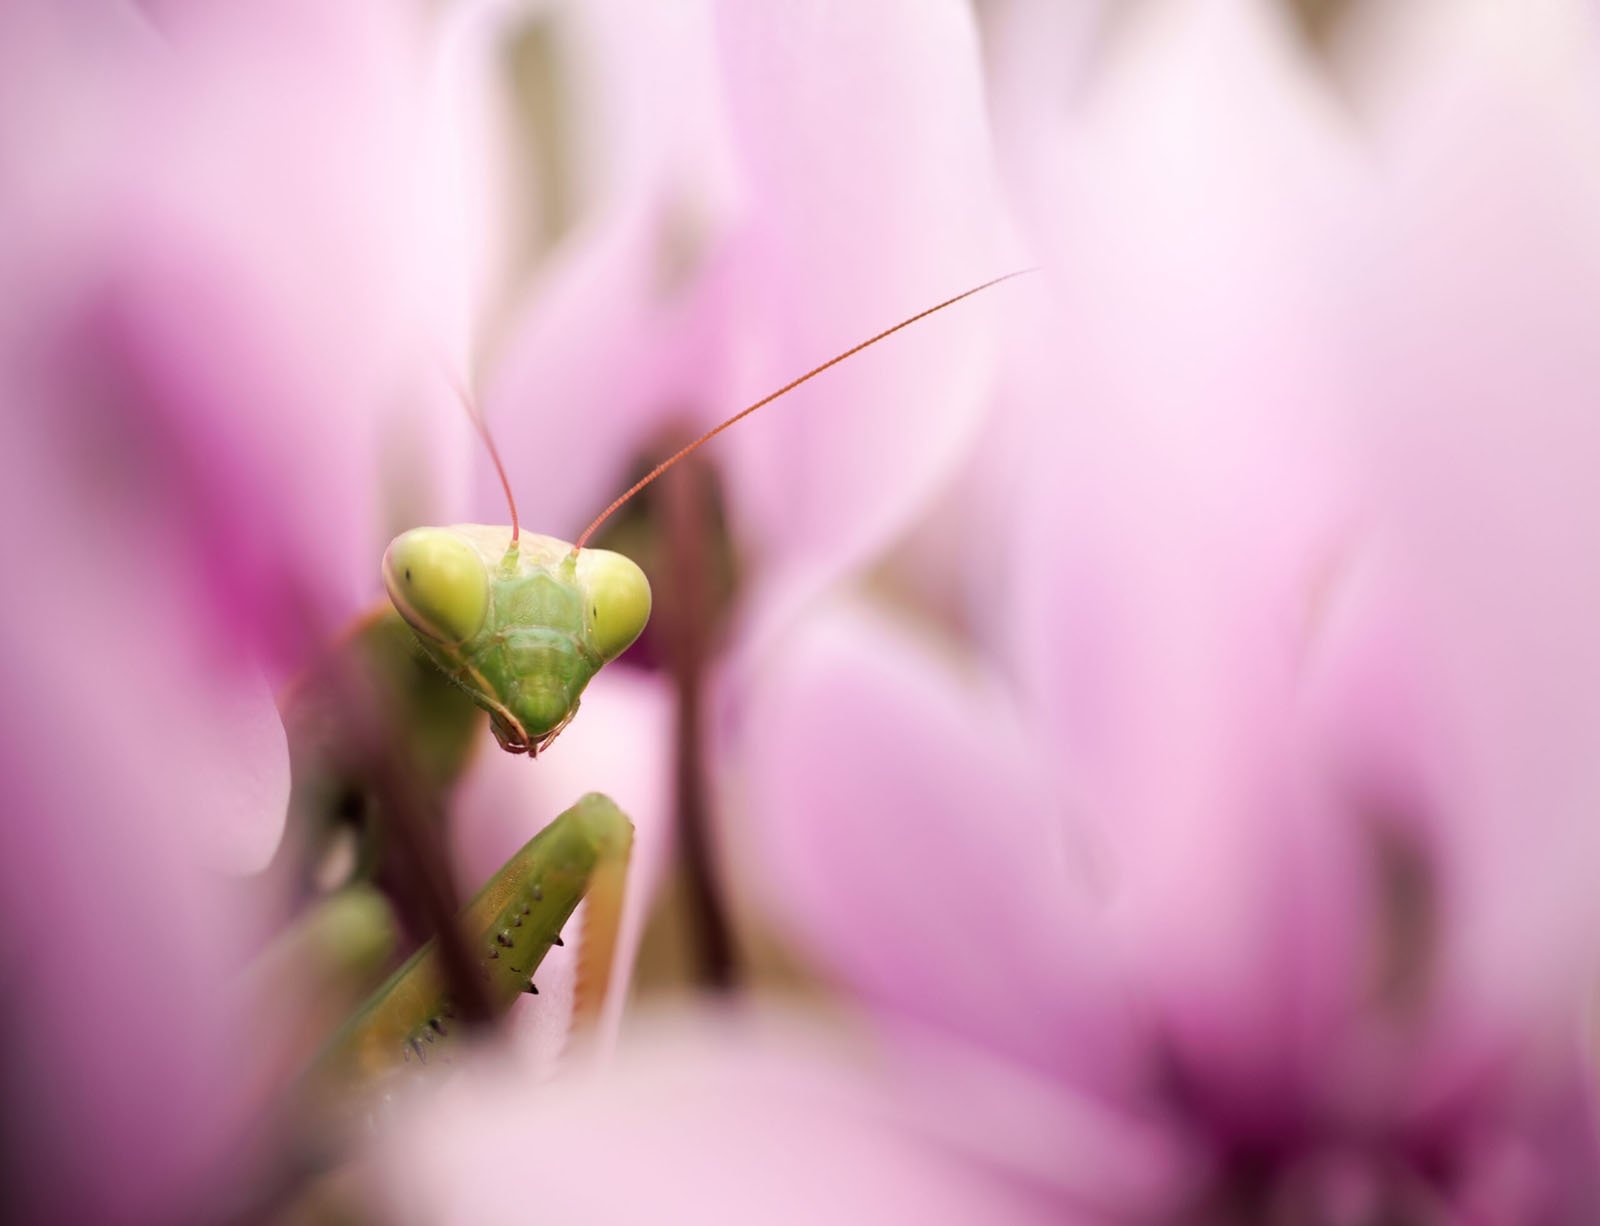 Close-up photo of a green mantis peeking through soft pink petals, with its yellowish eyes and detailed antennae clearly visible. The background is a blur of vibrant pink and green, enhancing the mantis's vivid color and intricate details.